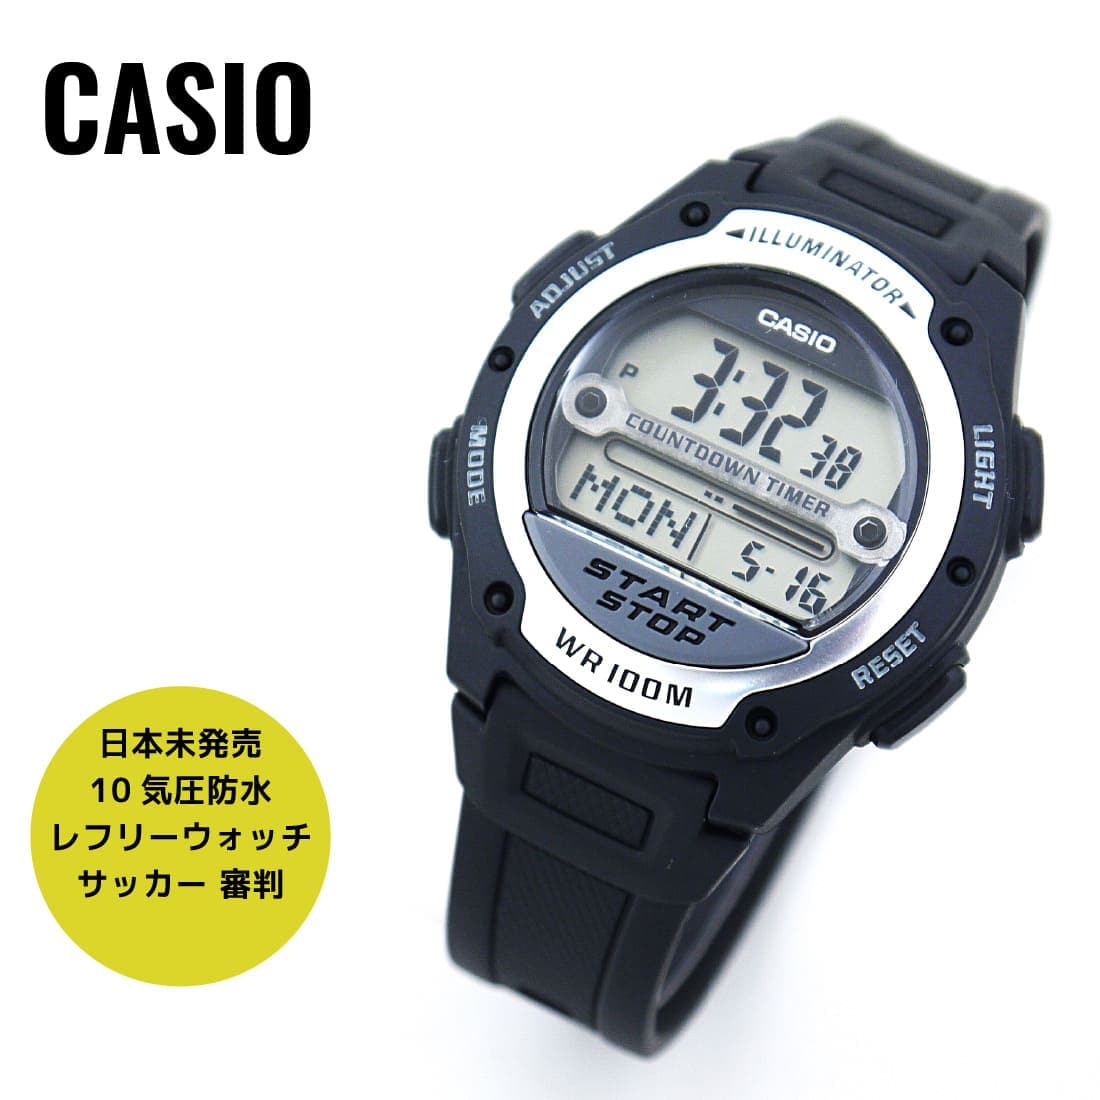 New]Only as for the email service delivery, it is The CASIO Casio soccer  umpire refuriuotchirefiri W-756-1A Black Ladies mens youth - BE FORWARD  Store